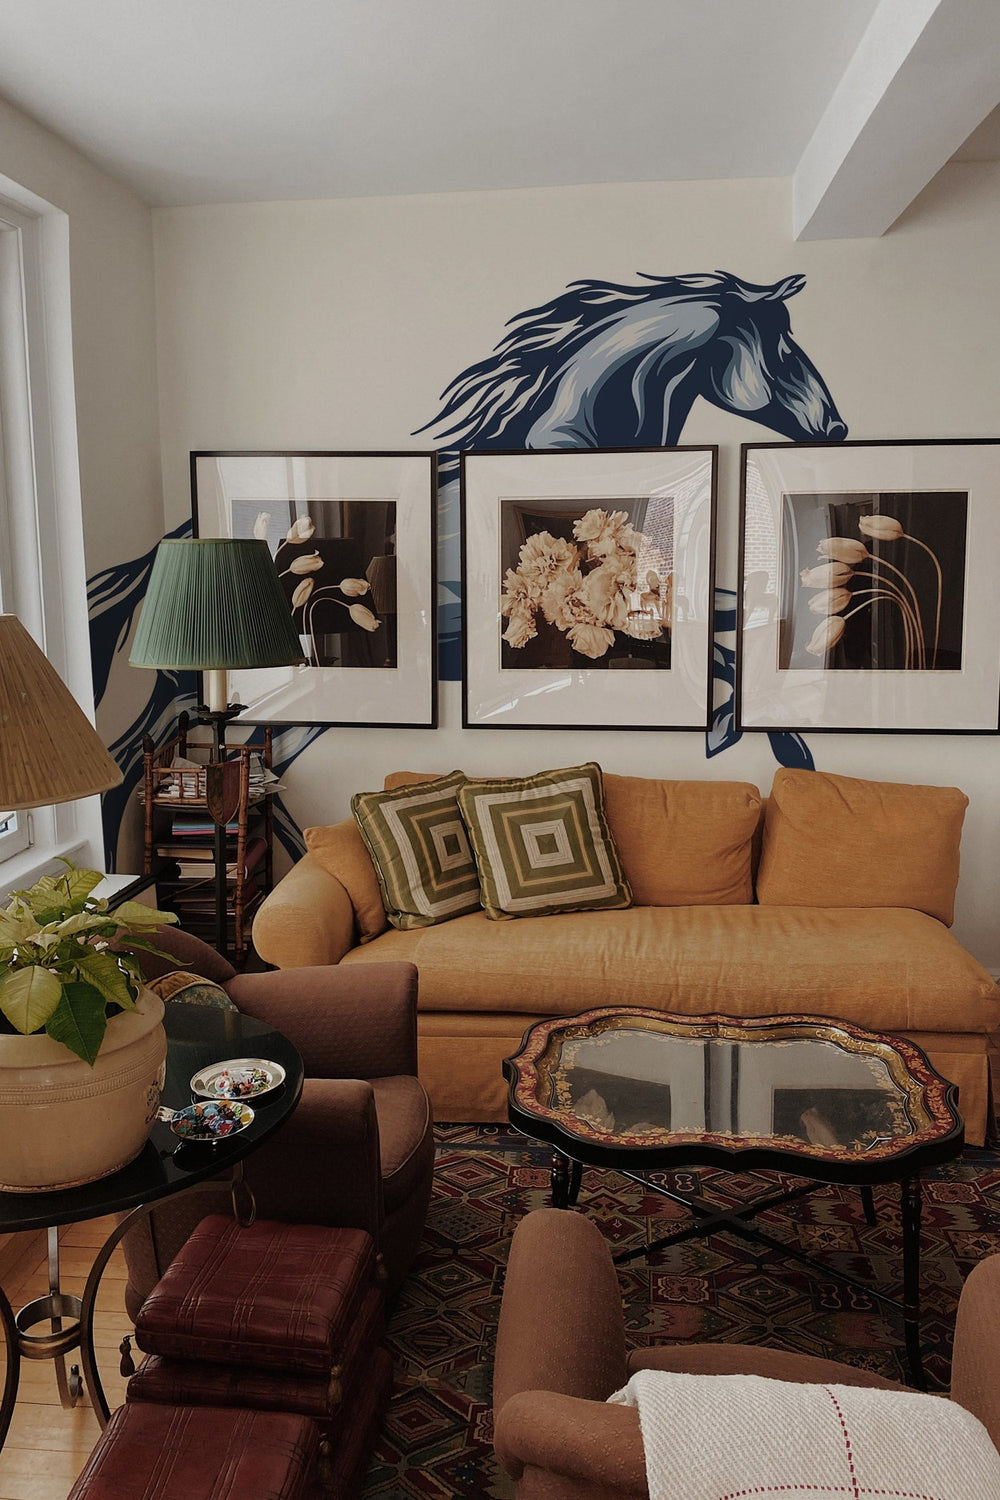 Interior of a living room featuring a large horse wall mural above the sofa and various framed pictures on the wall.